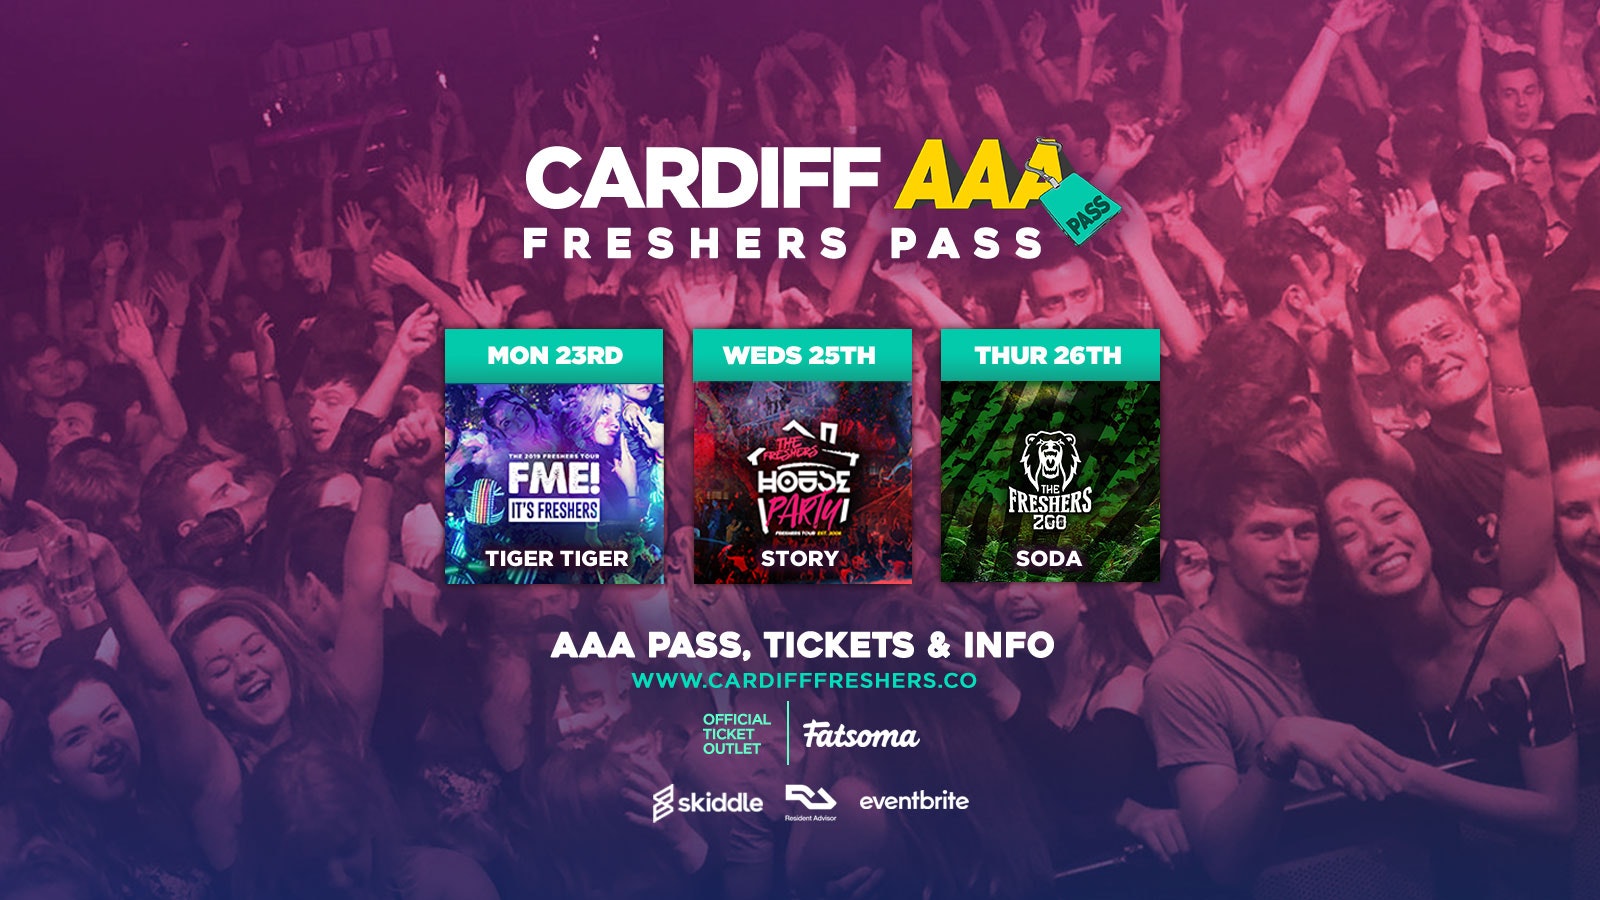 Cardiff AAA Freshers Pass 2019 | 3 Events, 1 Pass /// Cardiff Freshers 2019